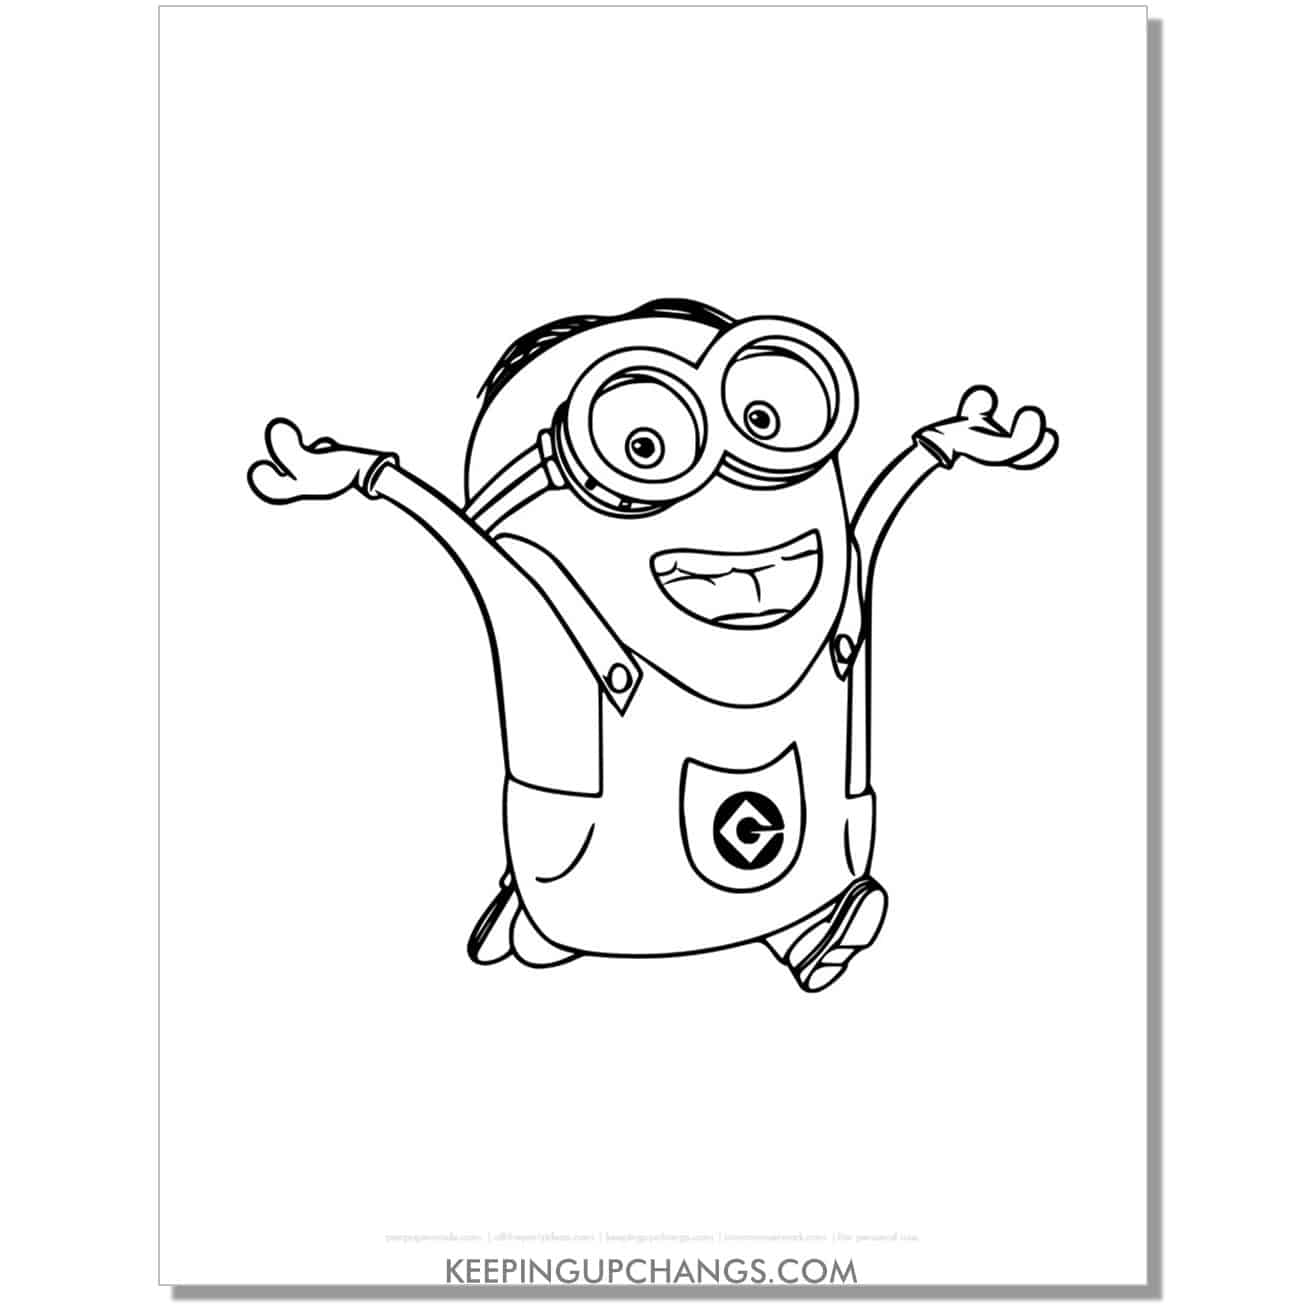 free two eye combover jumping minion coloring page, sheet.